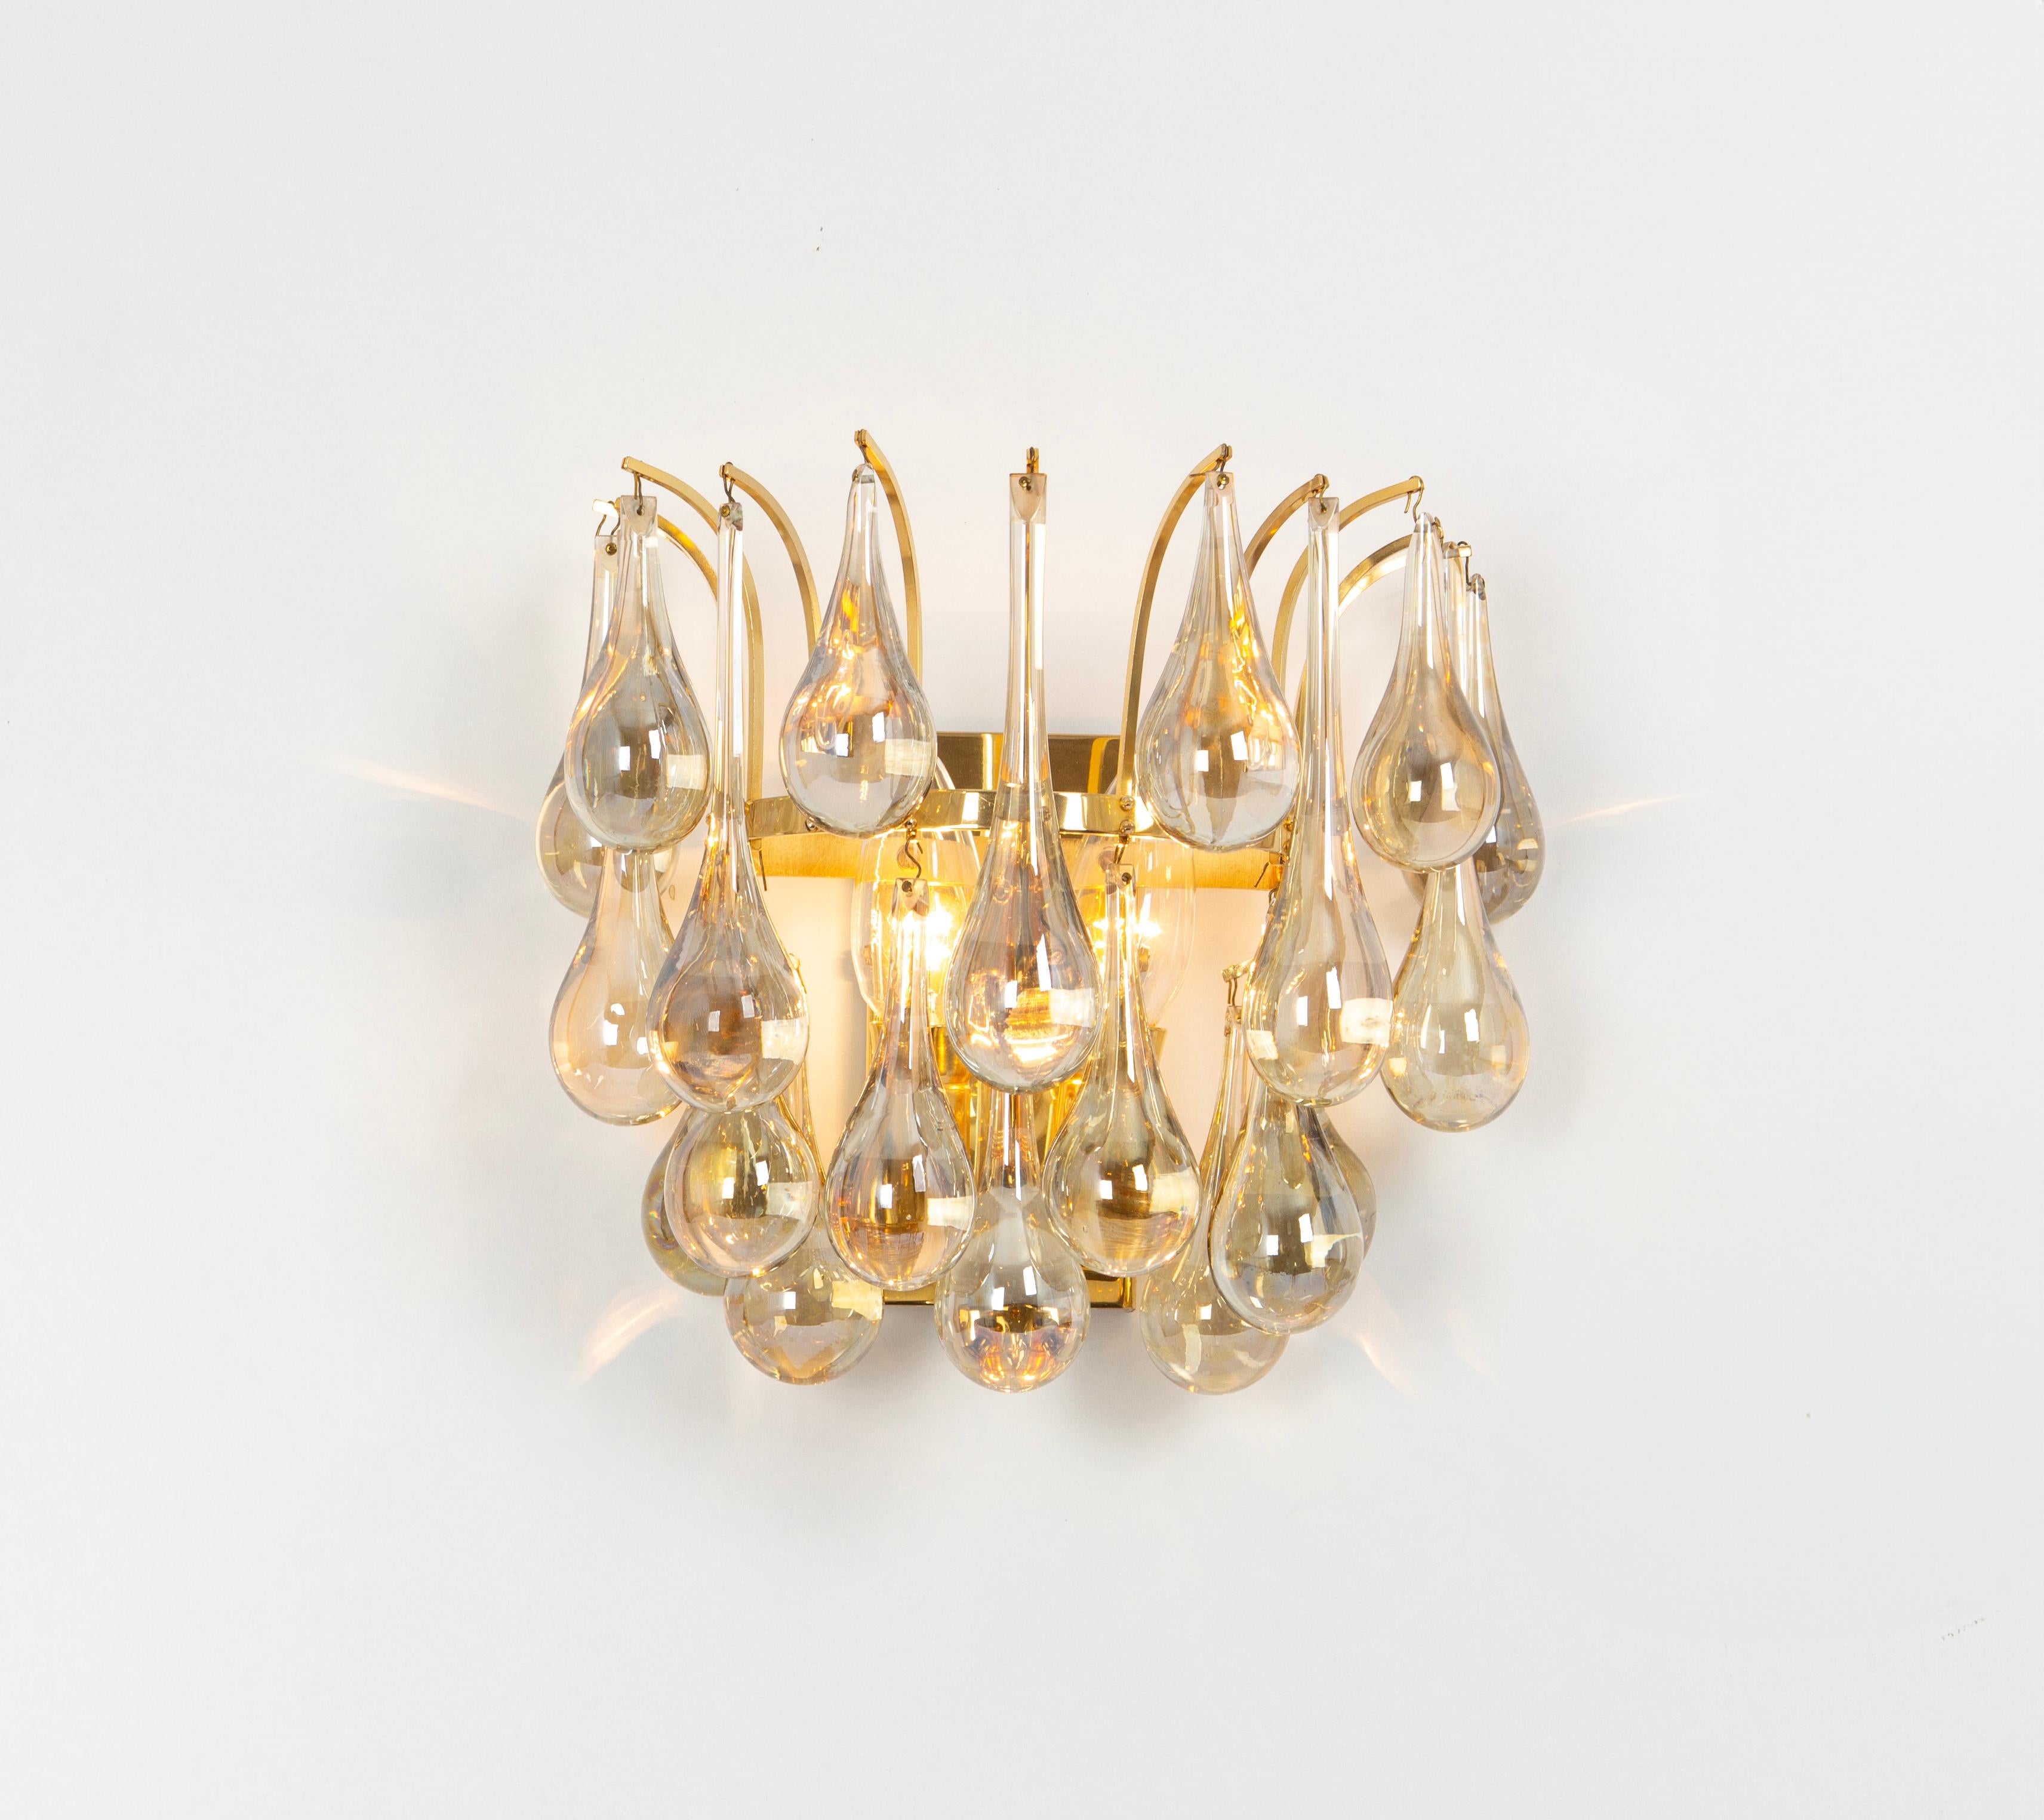 Large Pair of Golden Gilded Brass and Crystal Sconces by C.Palme, Germany, 1970s For Sale 1